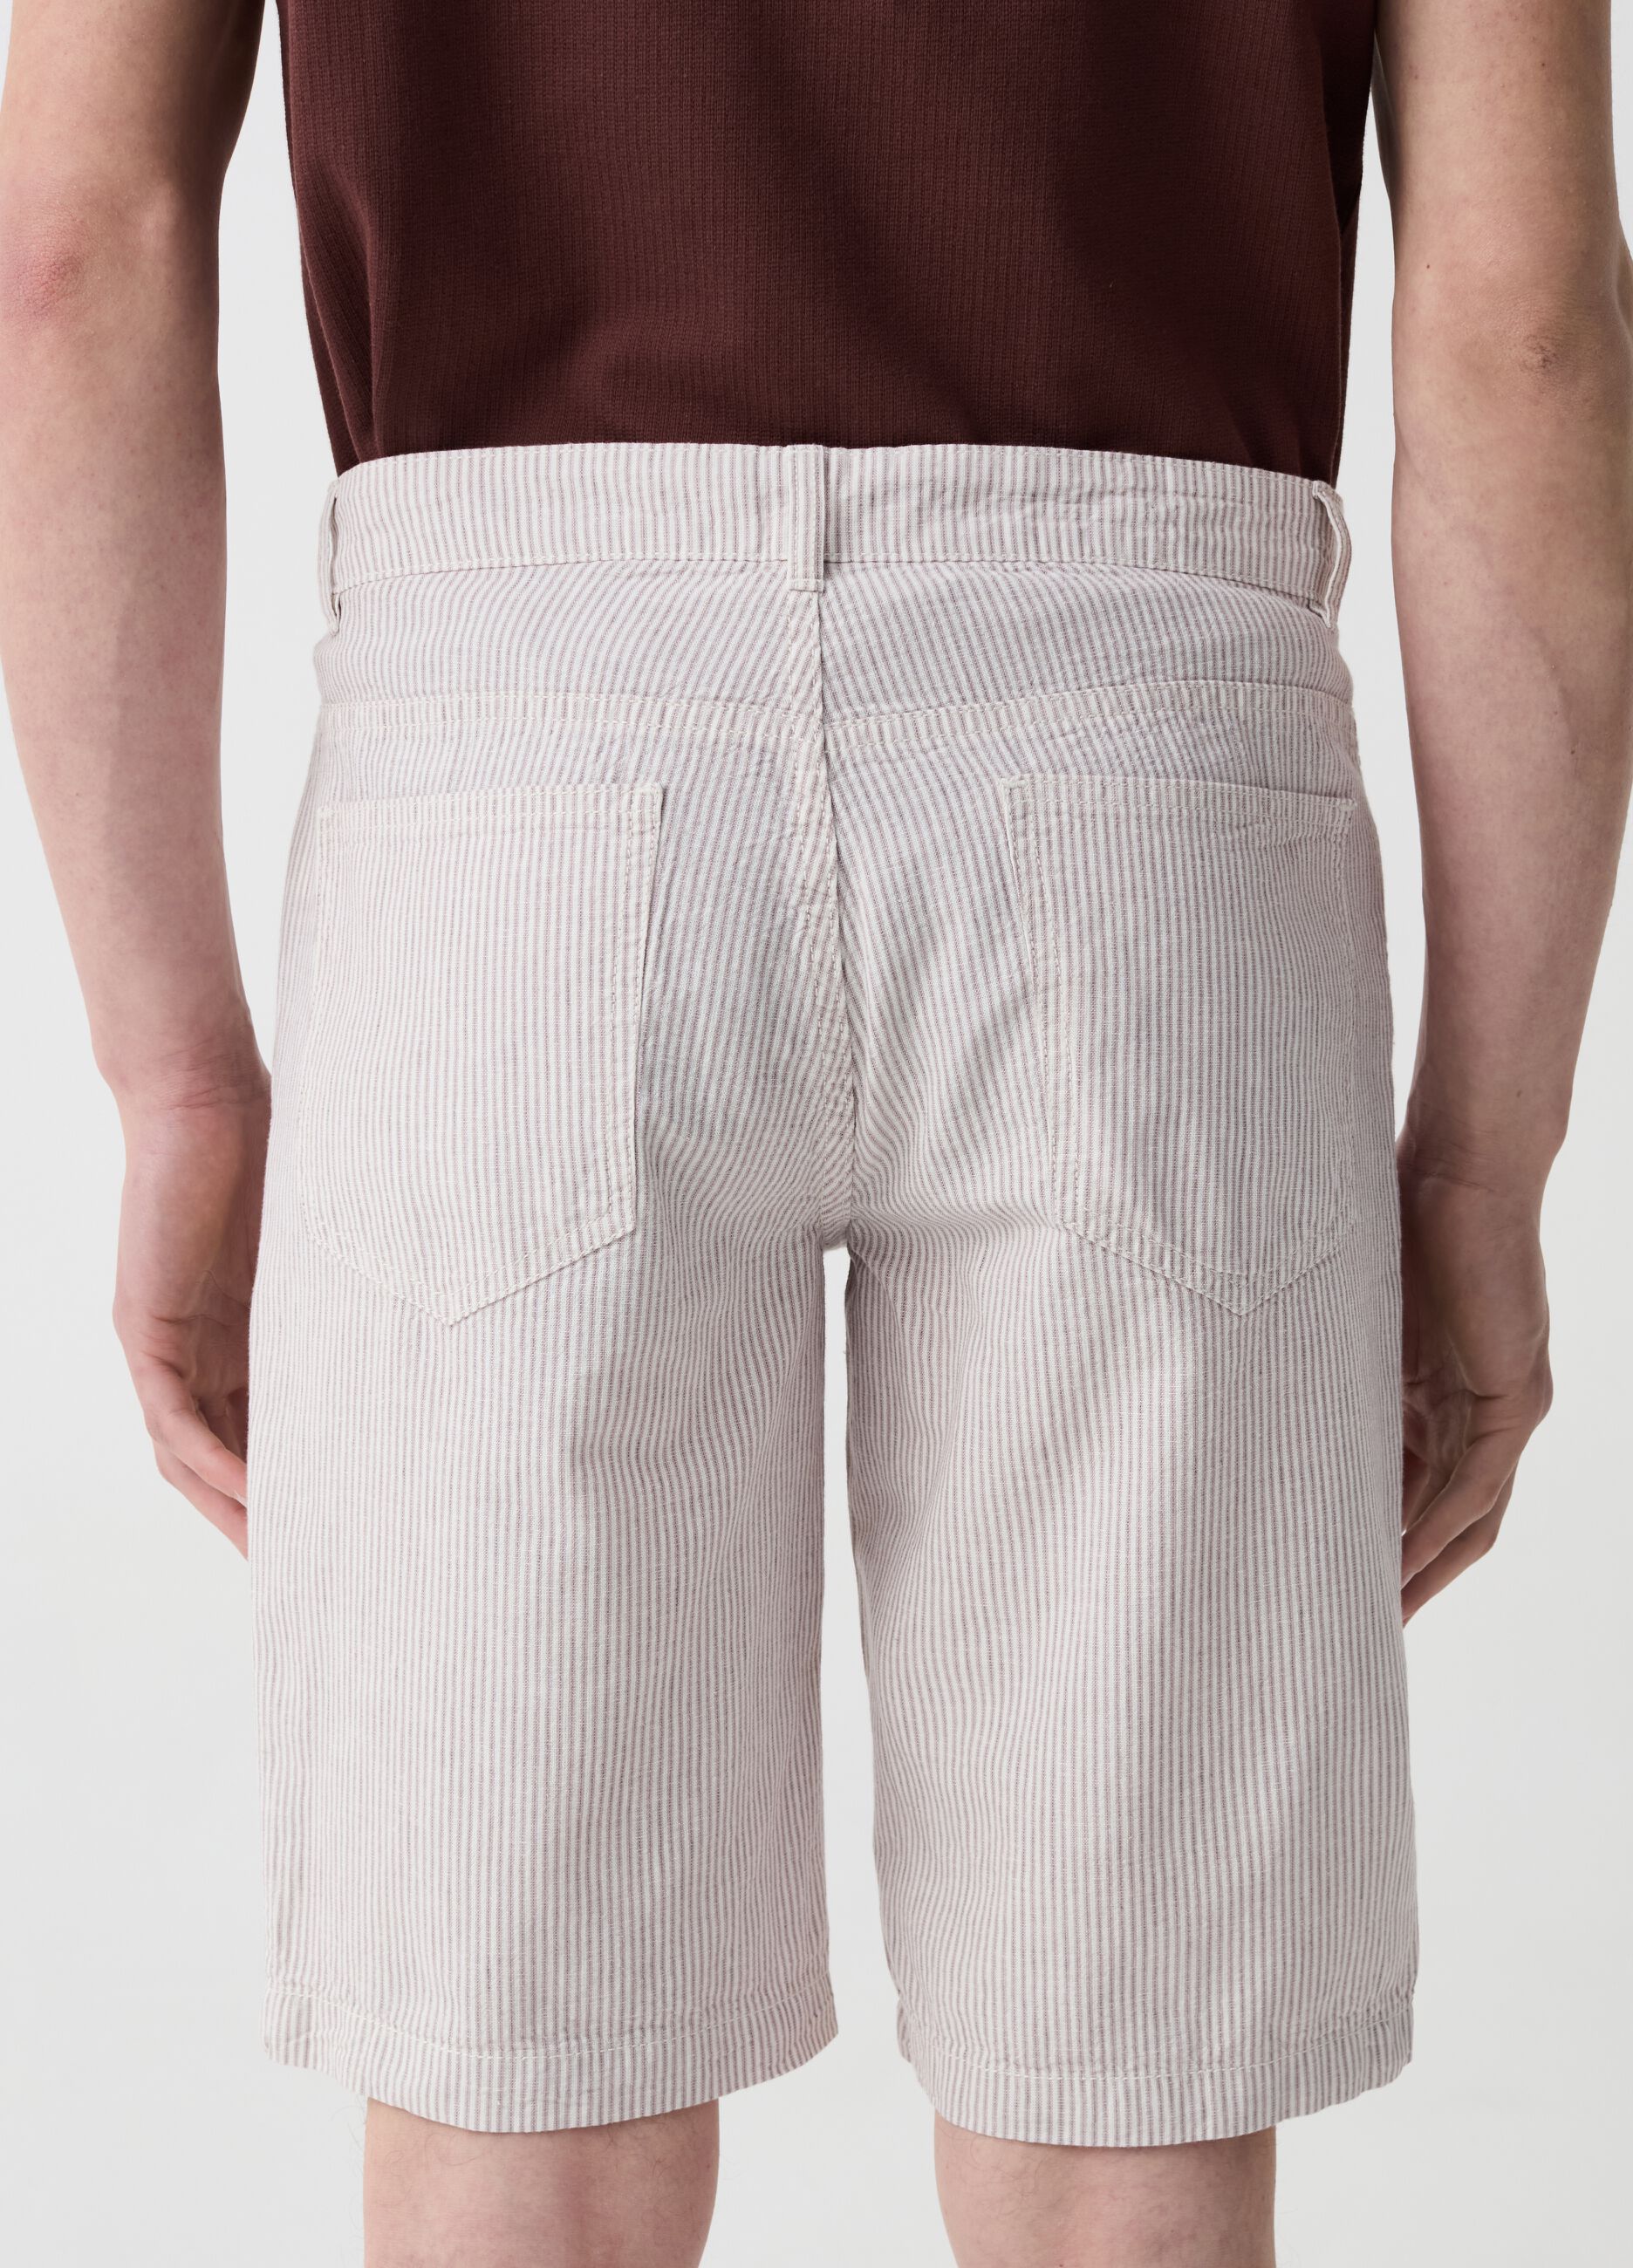 Bermuda shorts with thin stripes and five pockets